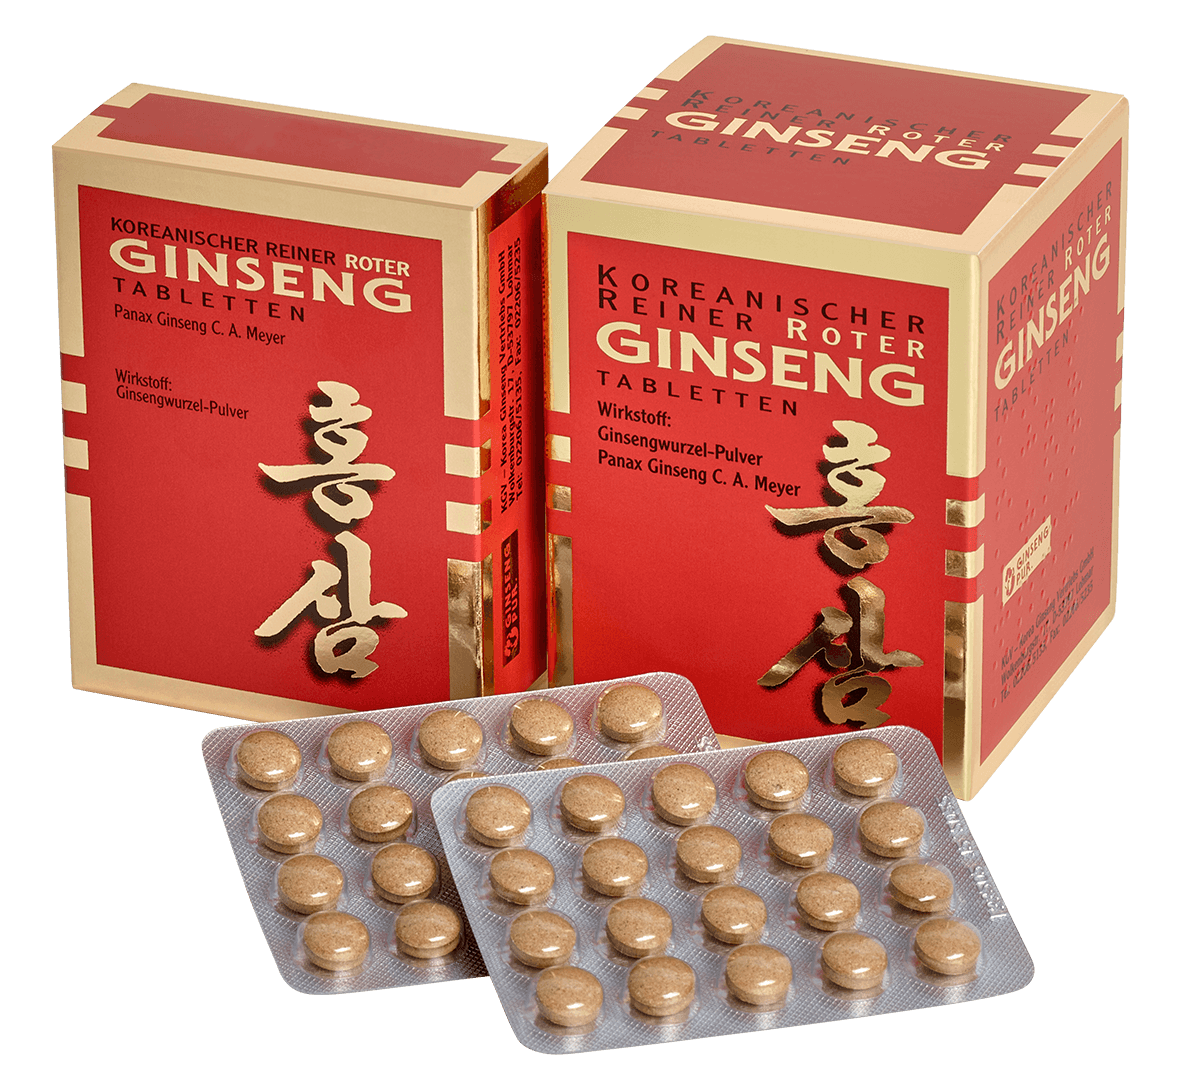 Roter Ginseng 300 mg Tabletten